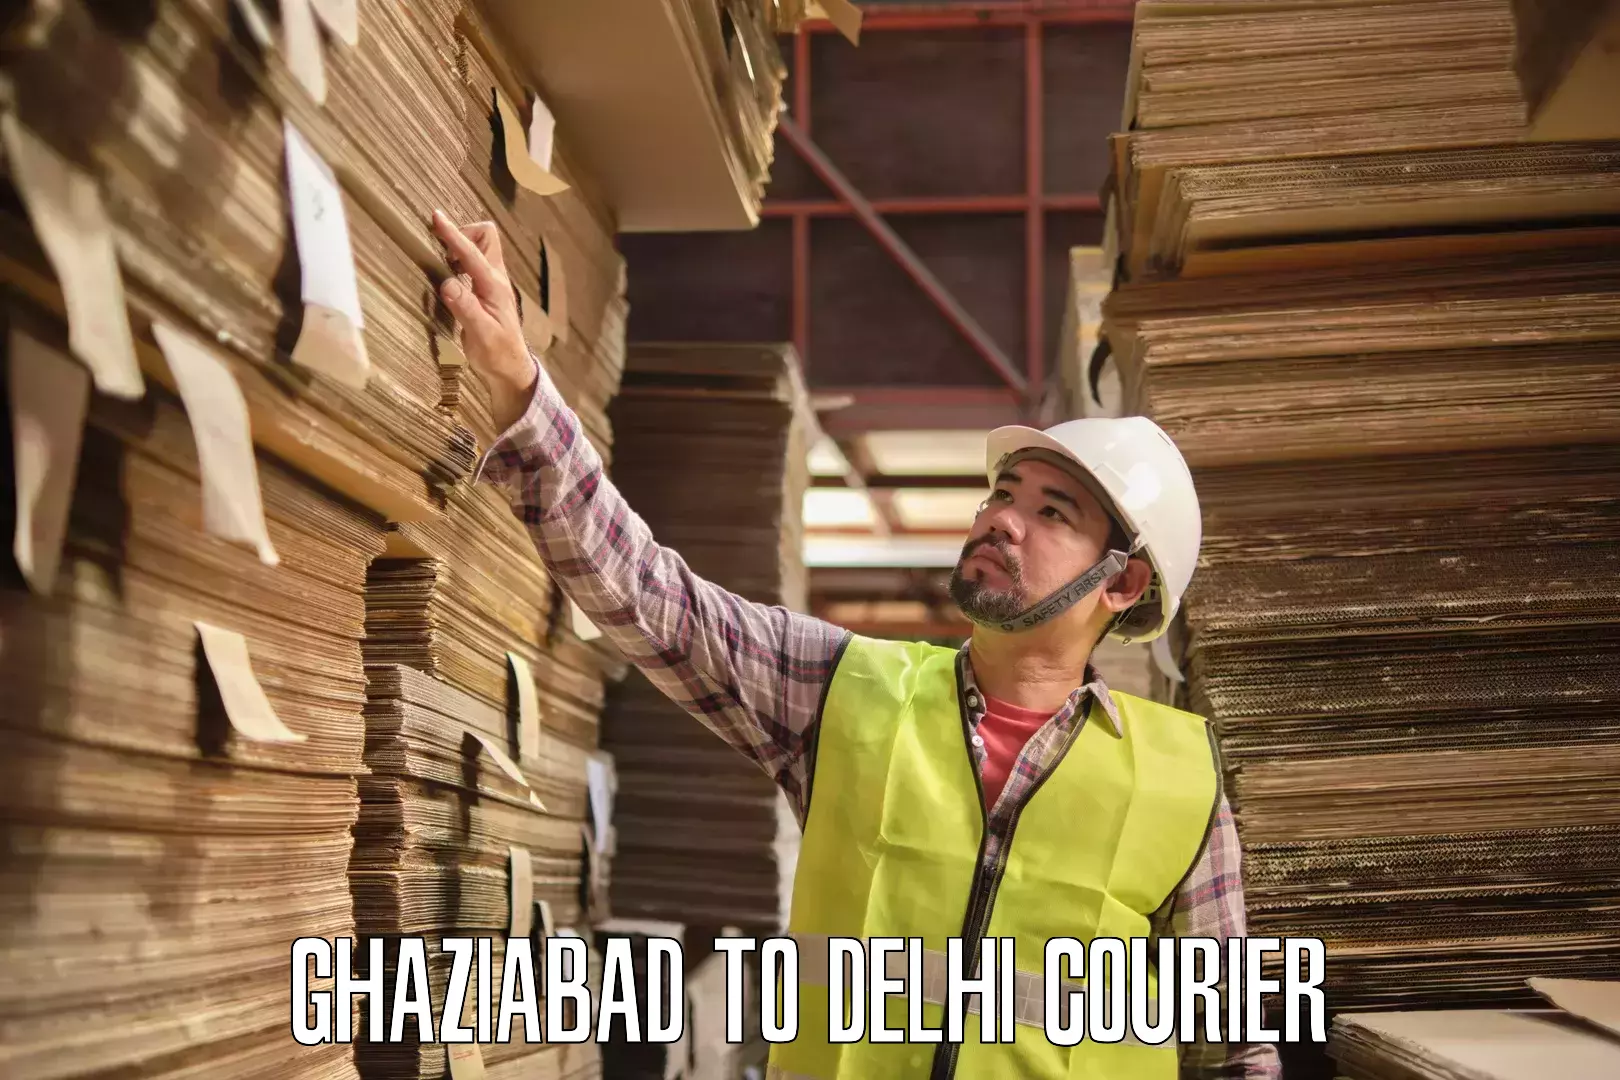 Local delivery service Ghaziabad to Indraprastha